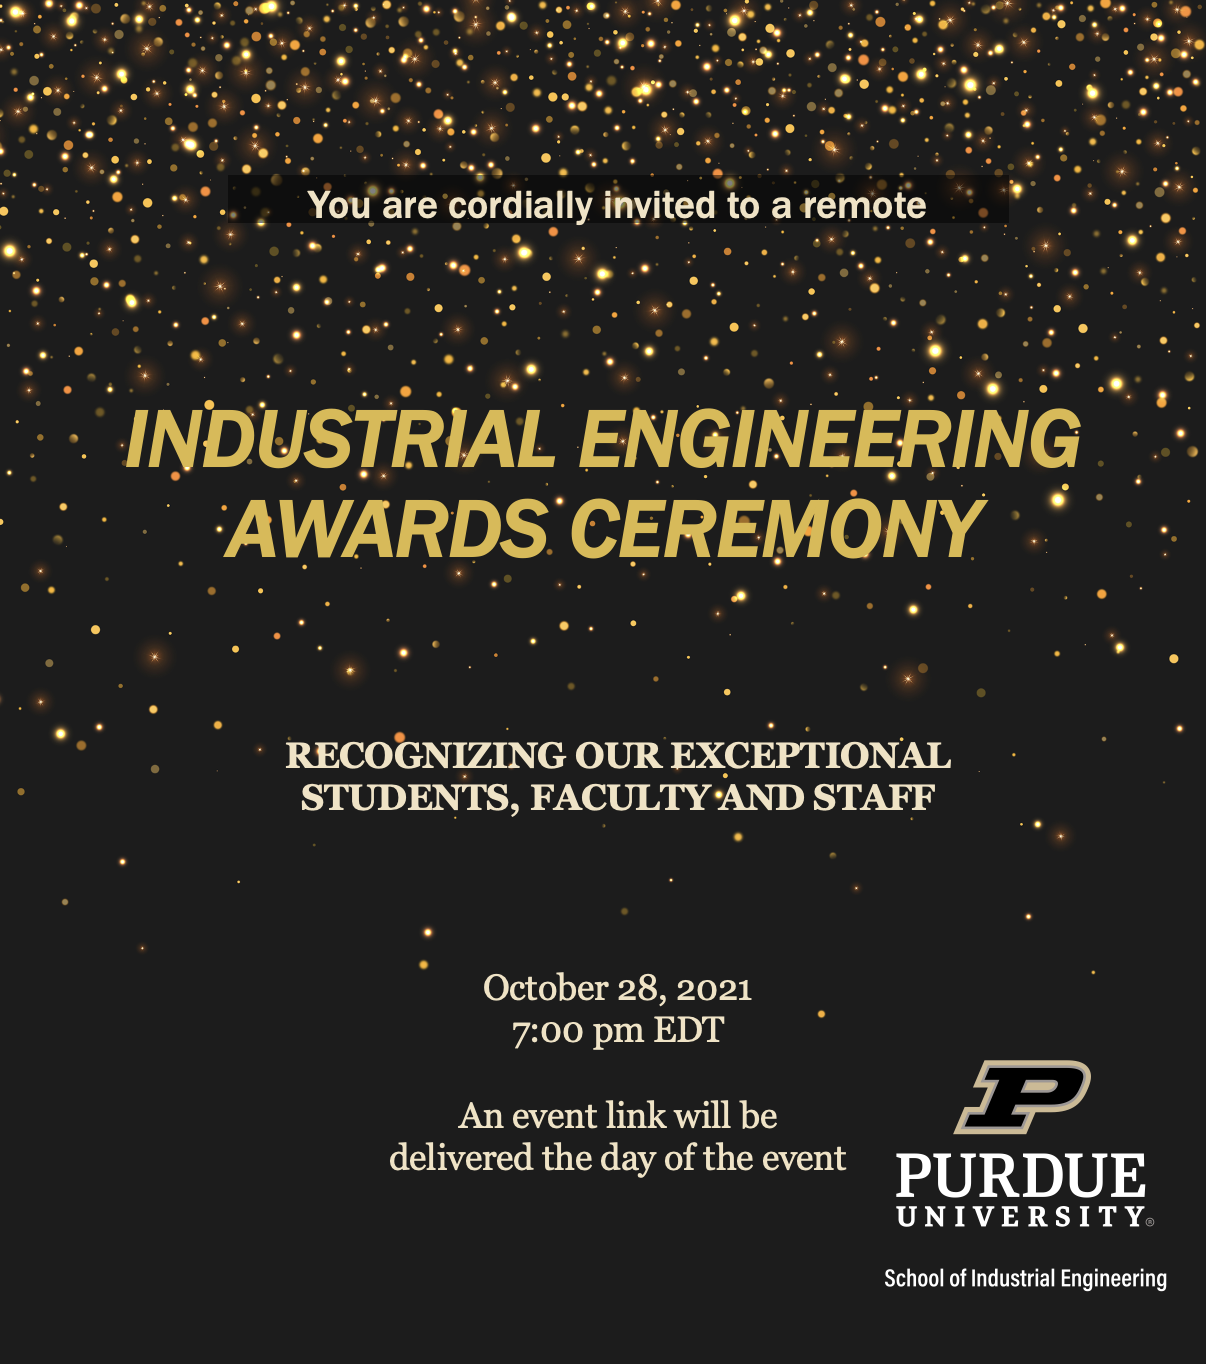 You are cordially invited to a remote Industrial Engineering Awards Ceremony recognizing our exceptional students, faculty and staff; October 28, 2021; 7:00pm EDT; An Event link will be delivered the day of the event.